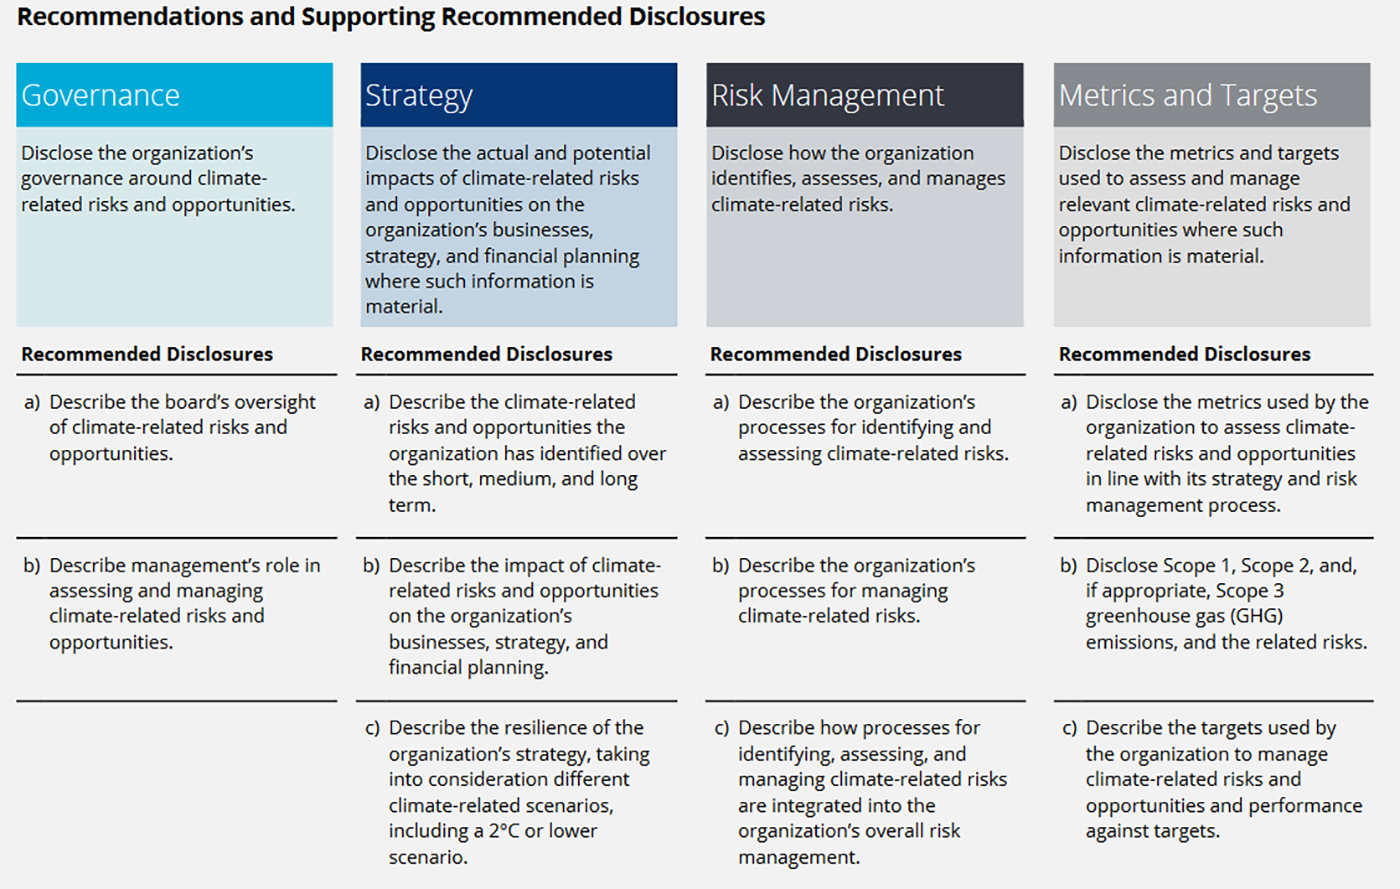 Recommendations and Supporting Recommended Disclosures